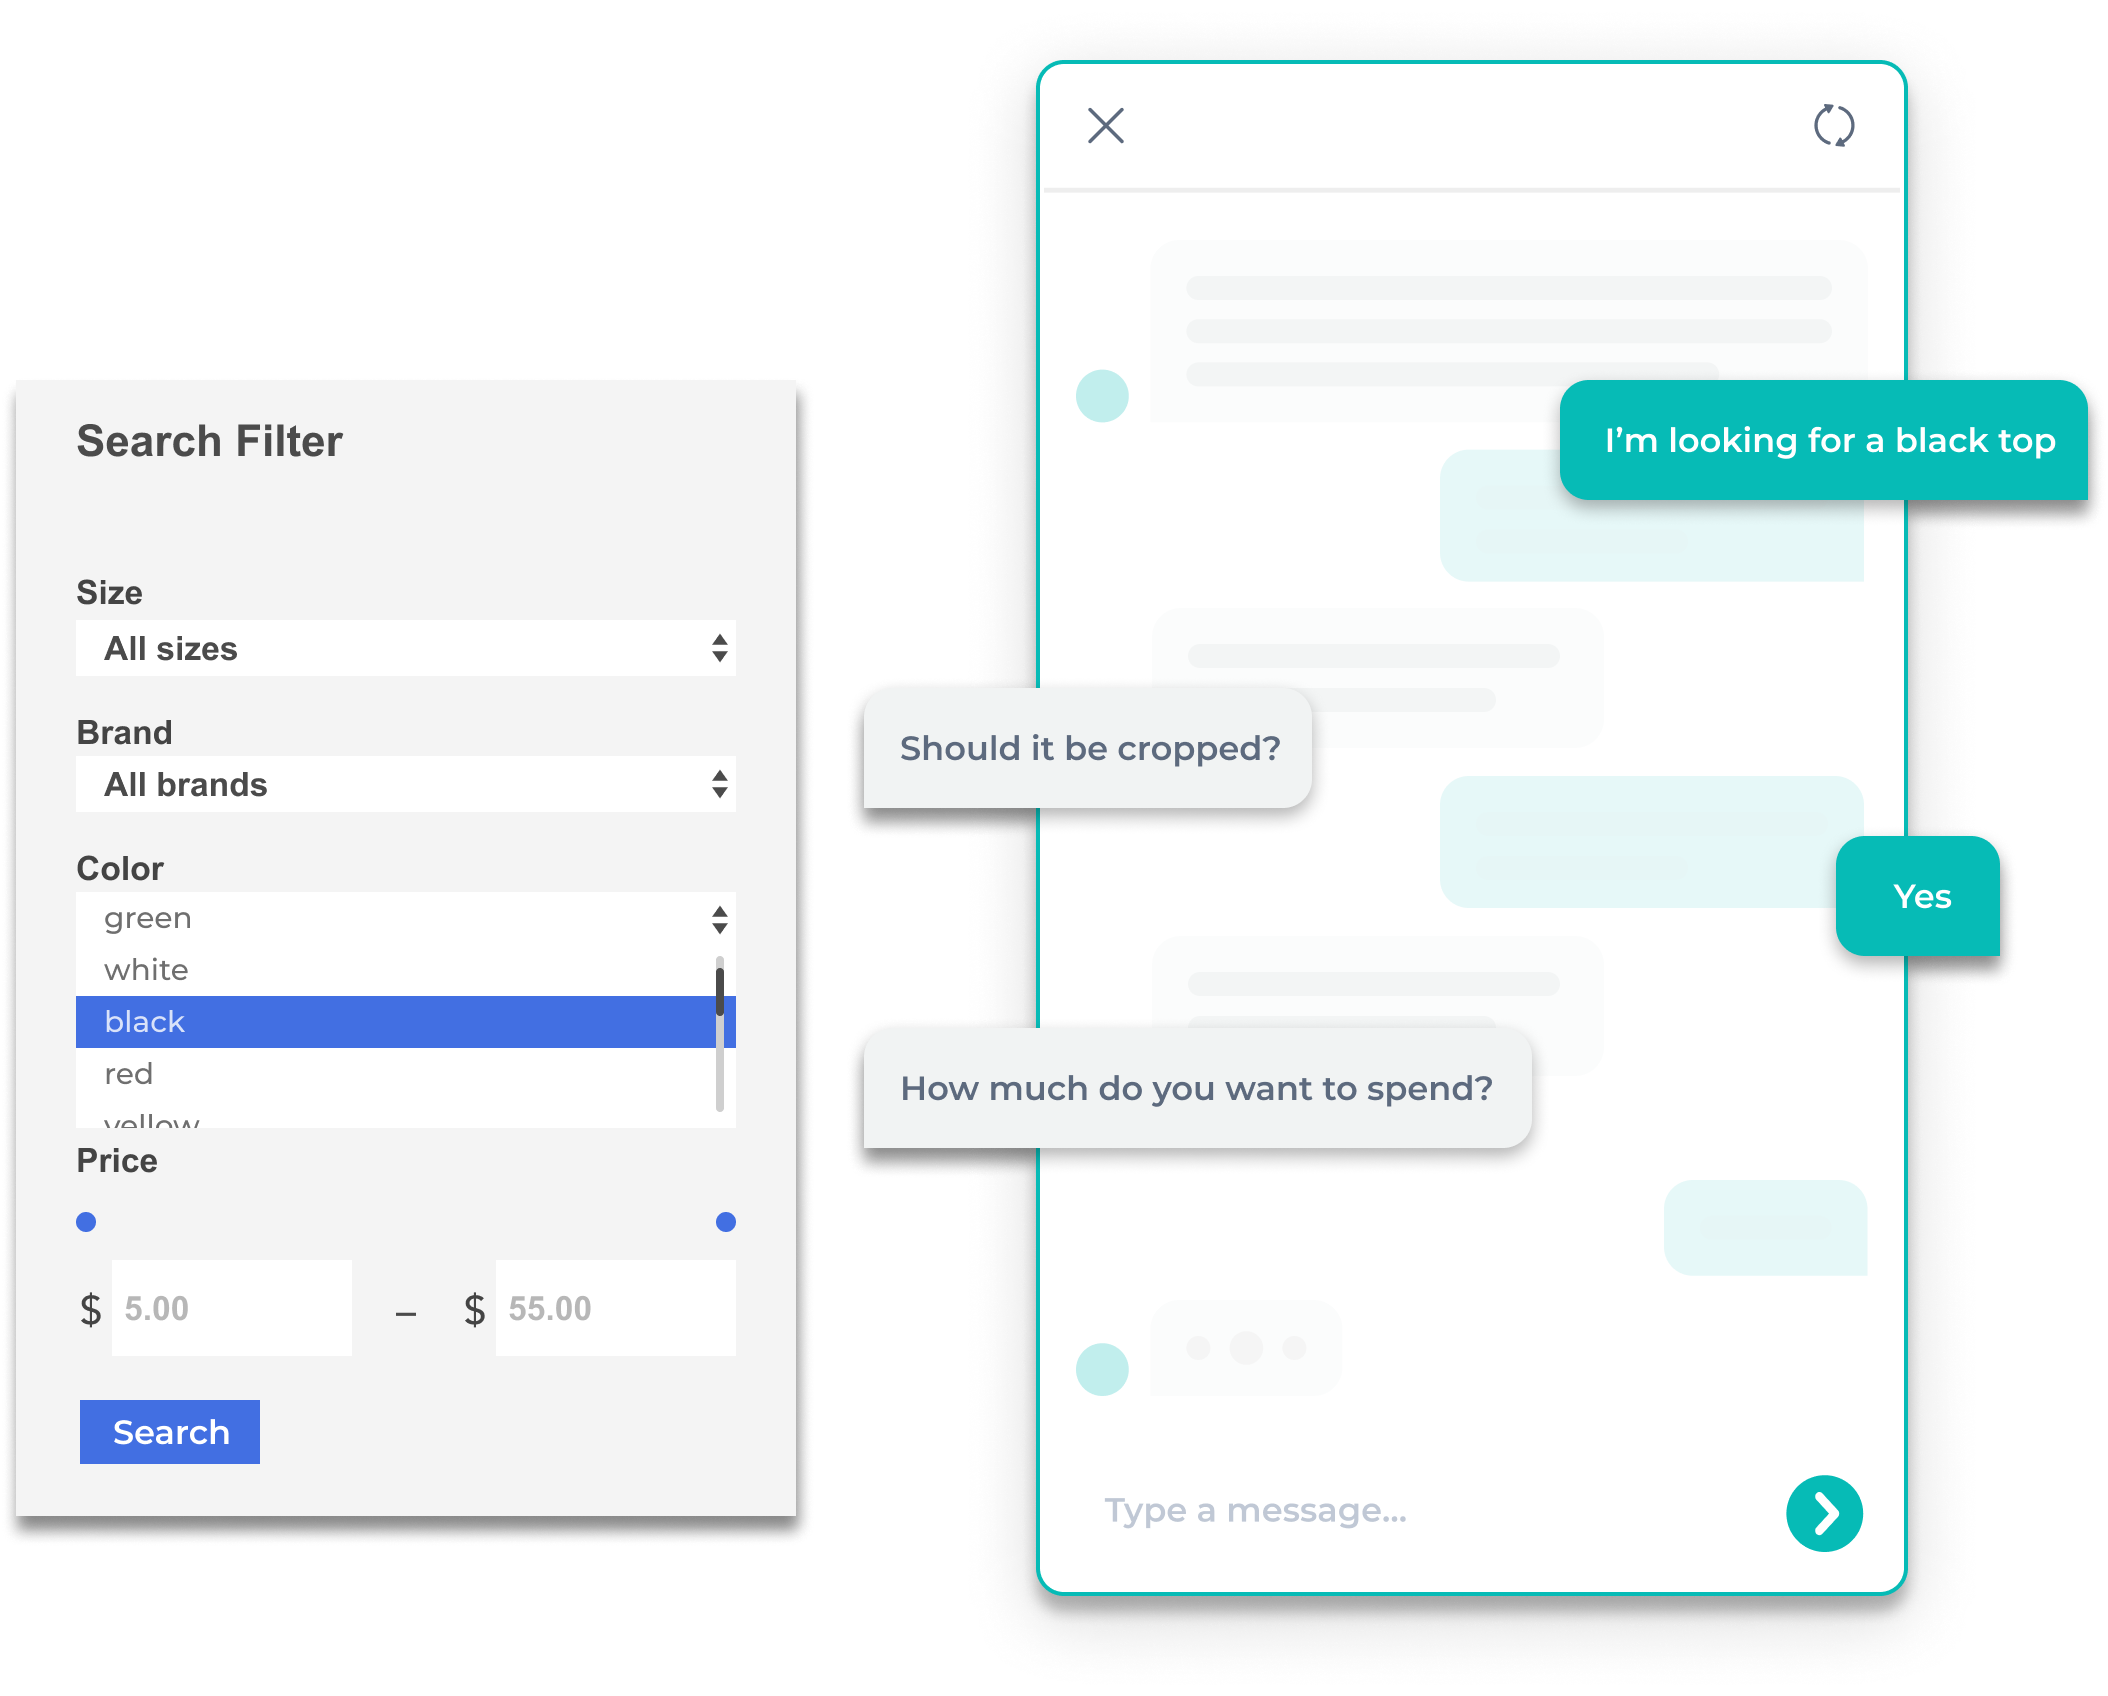  chat based product search inspora stylist